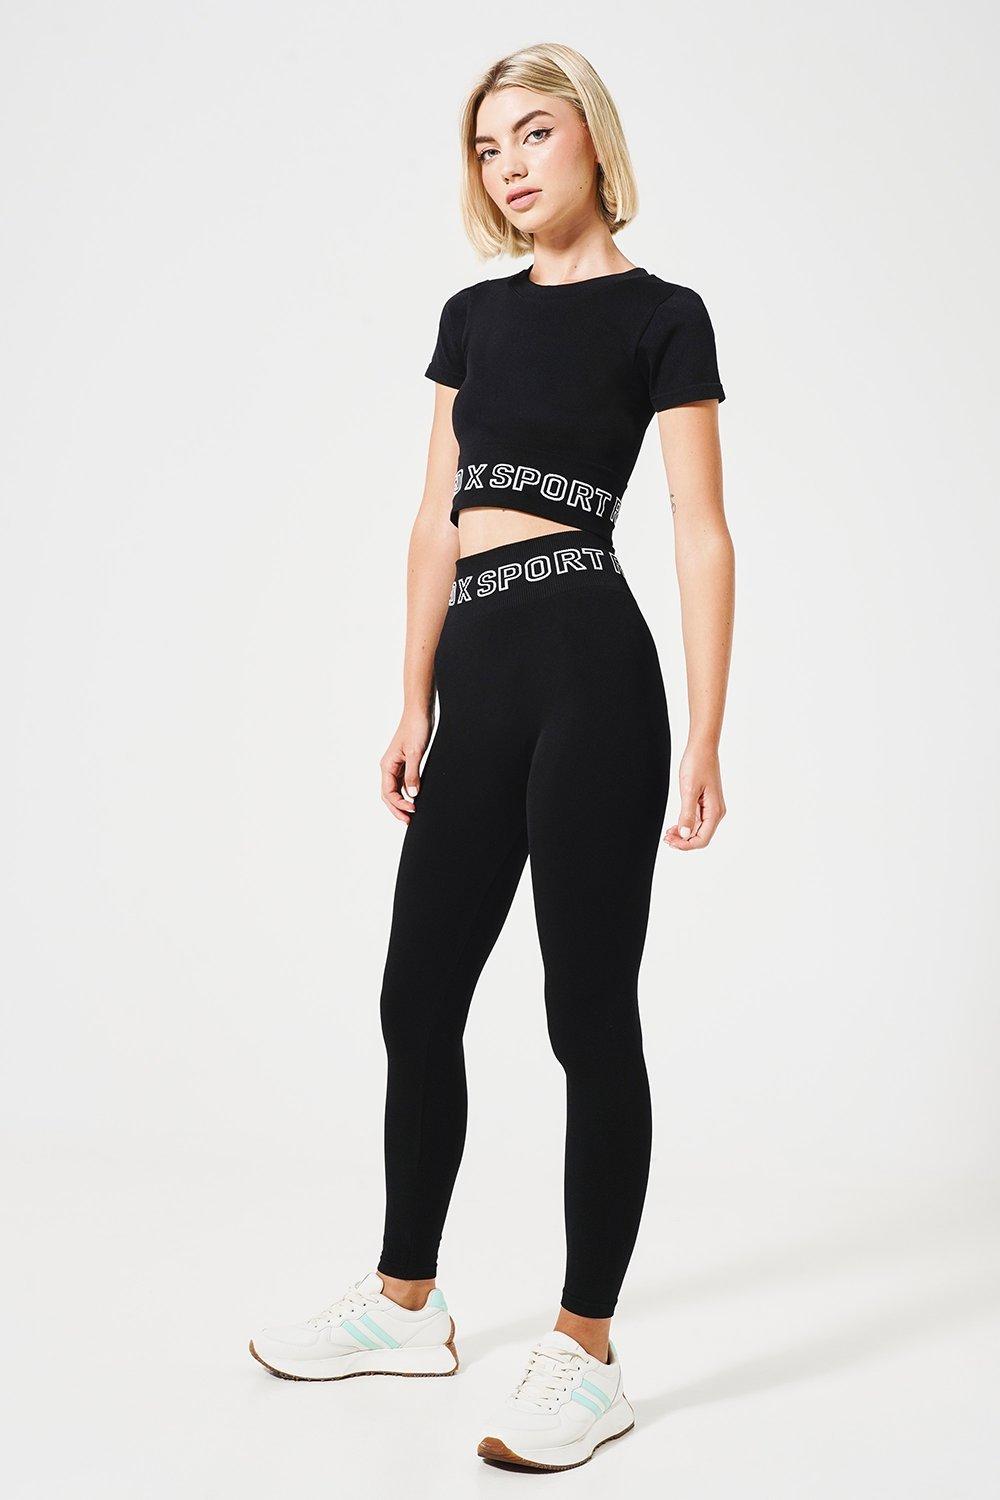 Mr Price Sport : Leggings That Level Up (Request Valid Date From Retailer)  — m.